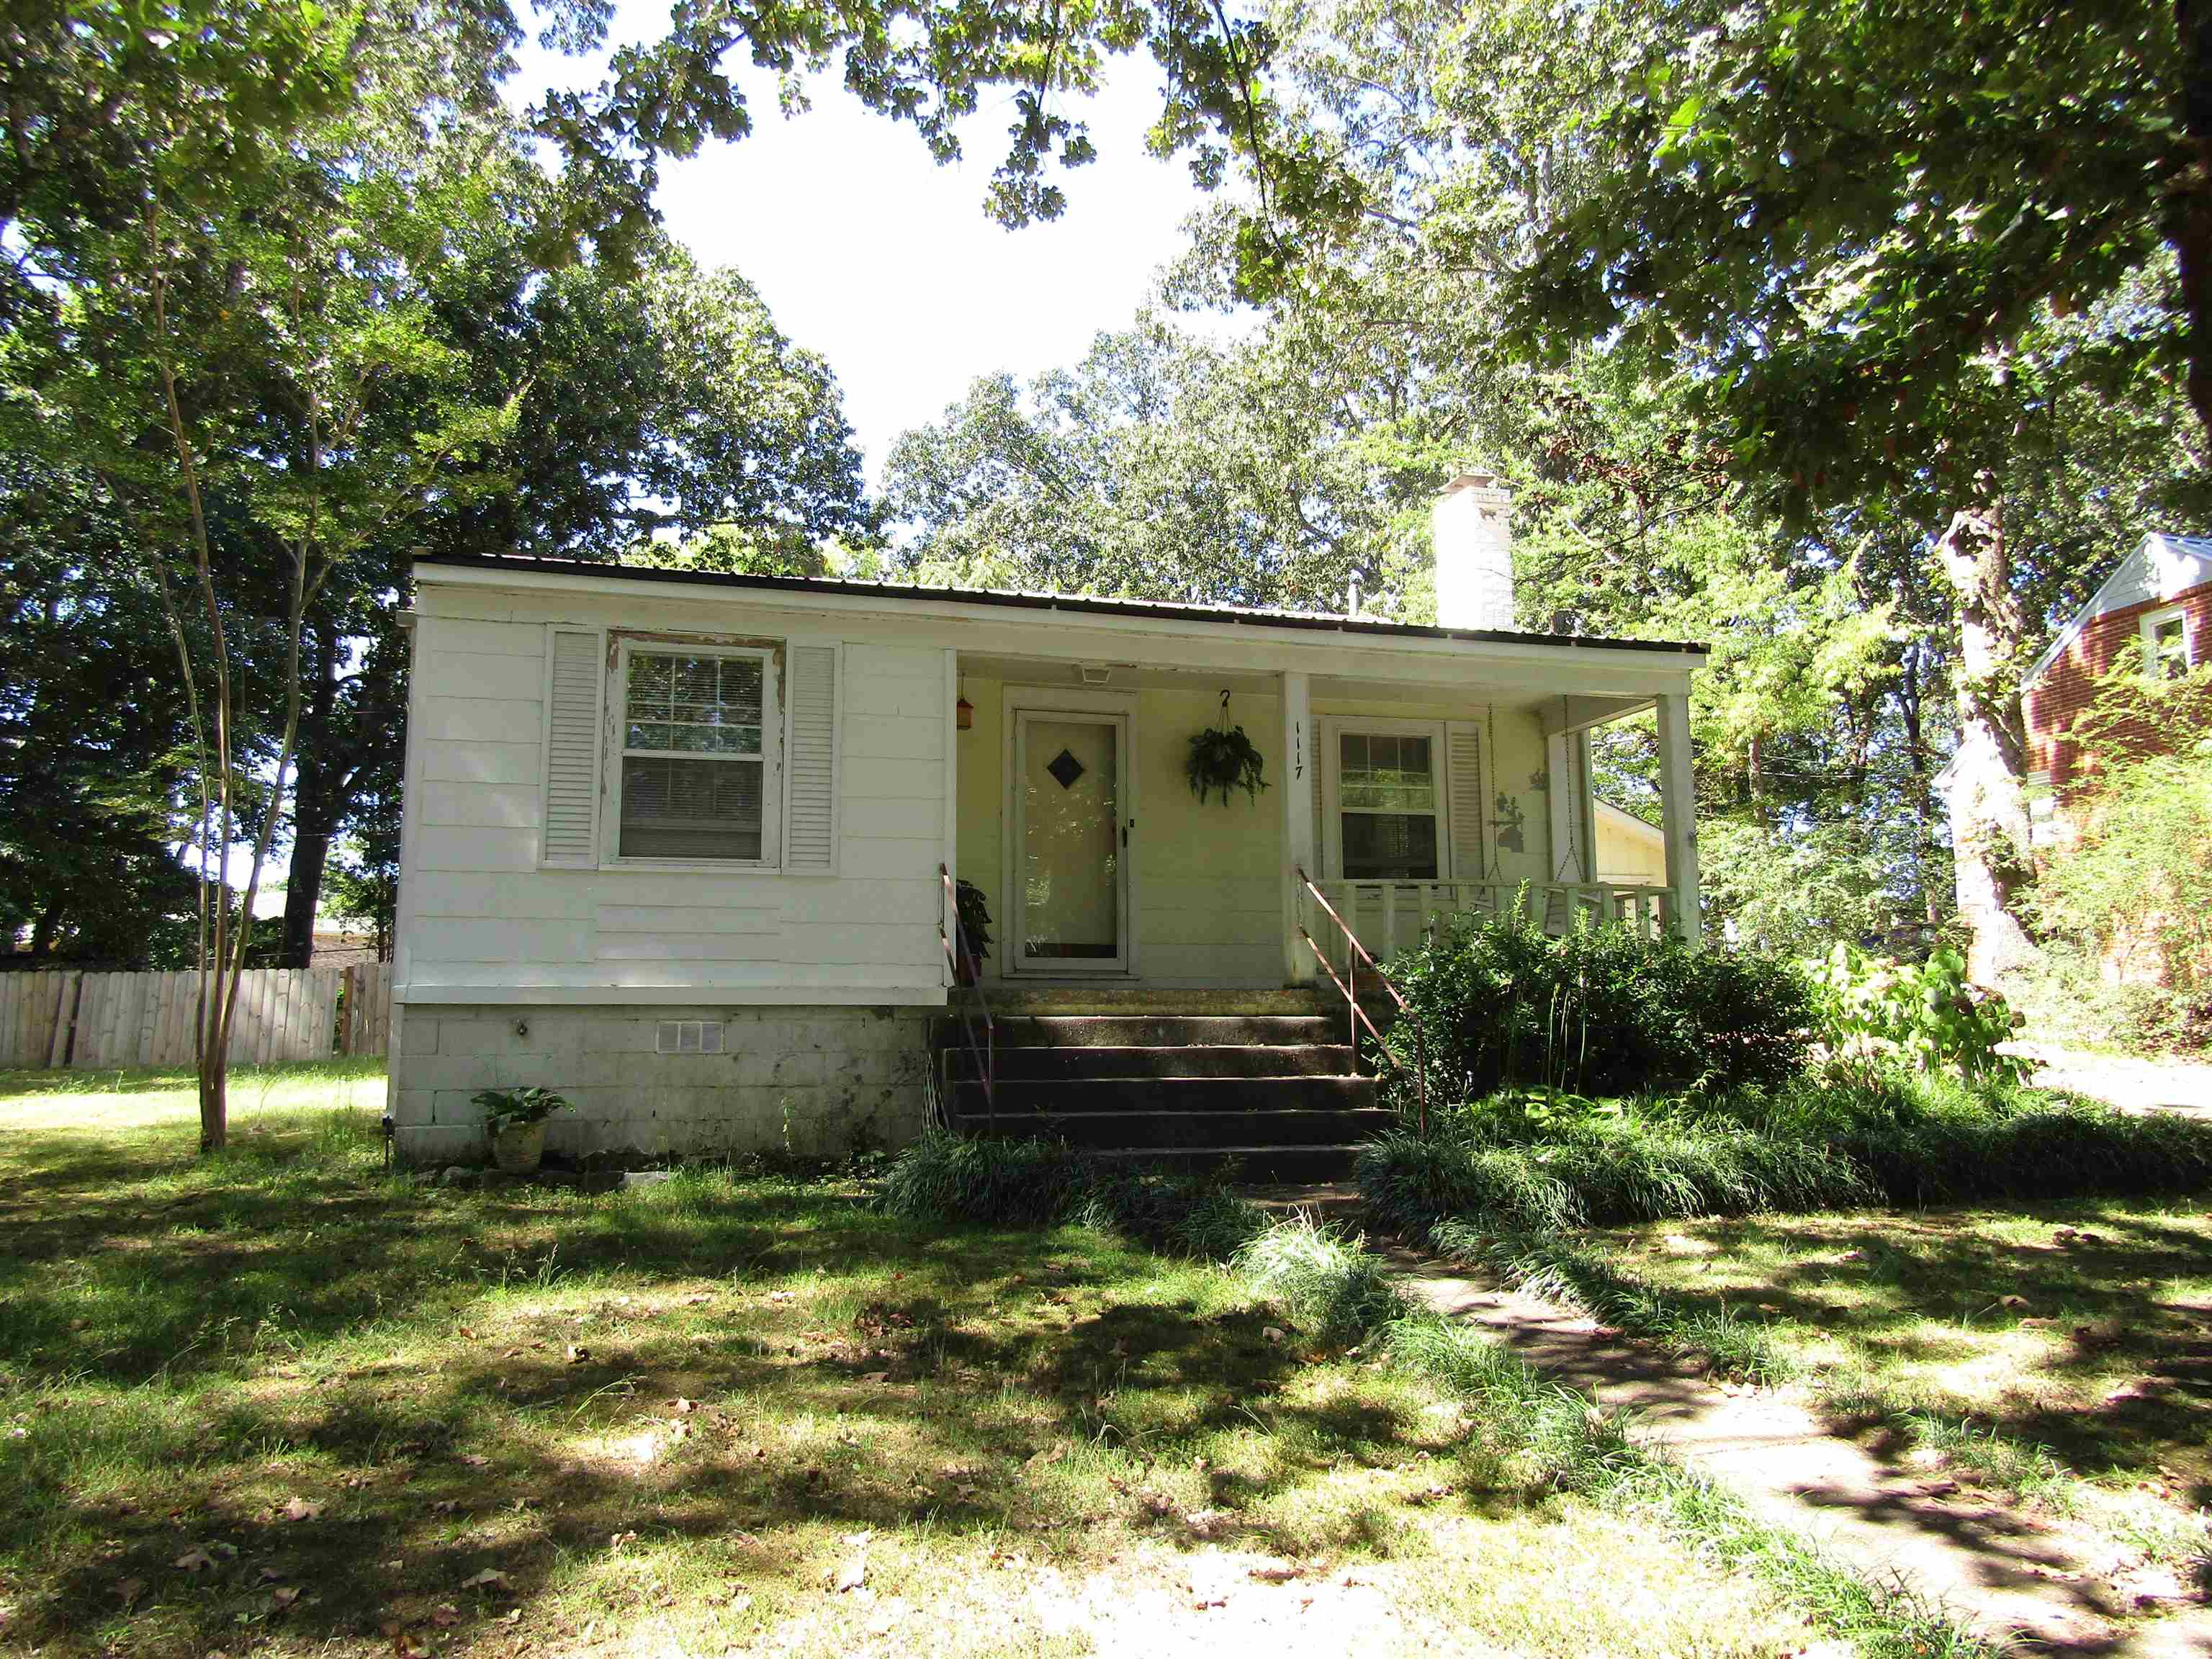 Adorable 2 bedroom, 1 bath home just minutes away from UNA.  You'll love the spacious back yard and or swinging on the porch swing on the front porch.  New roof in 2020.  Come see it for yourself.  Hablo Espanol.  Buyer to verify all information.